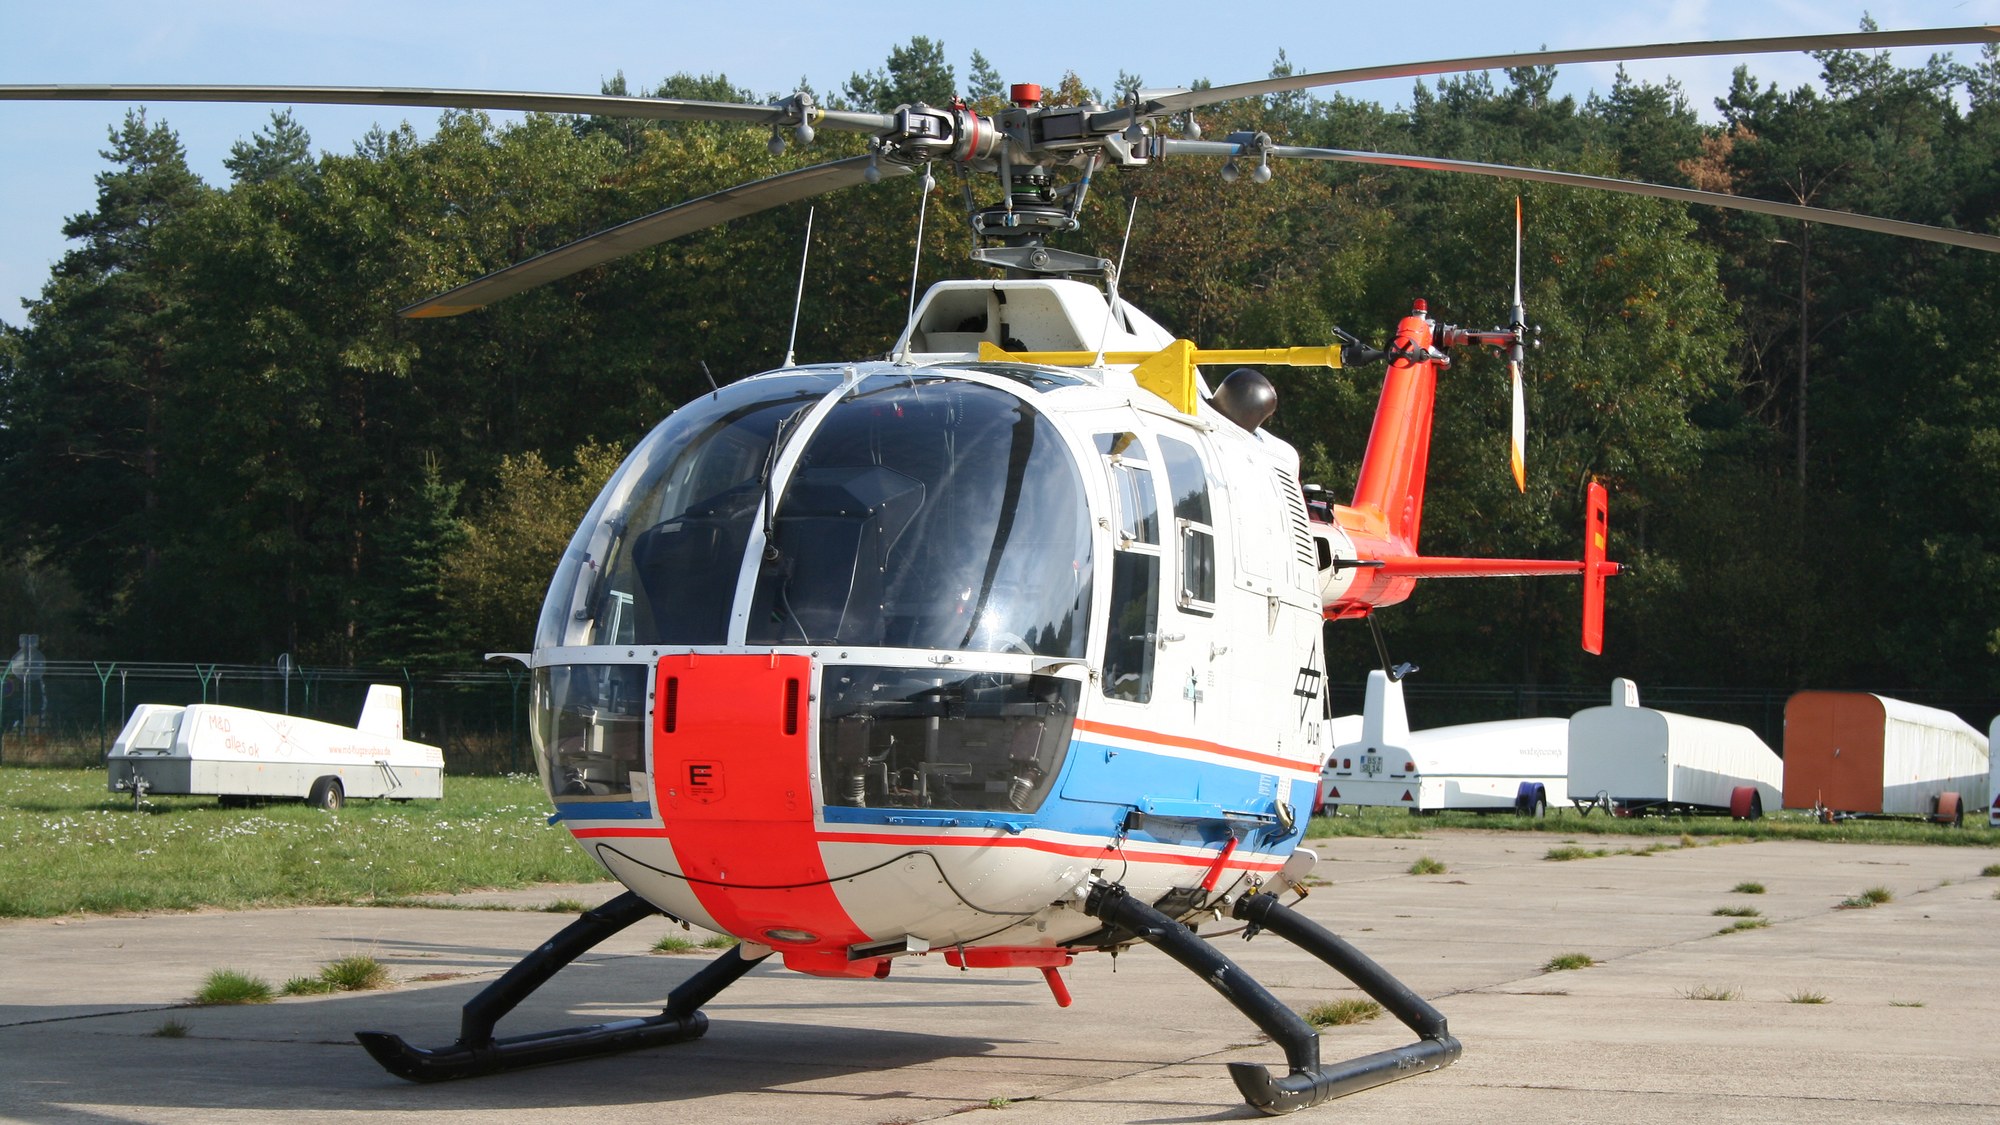 The five-seater Eurocopter BO 105 research platform